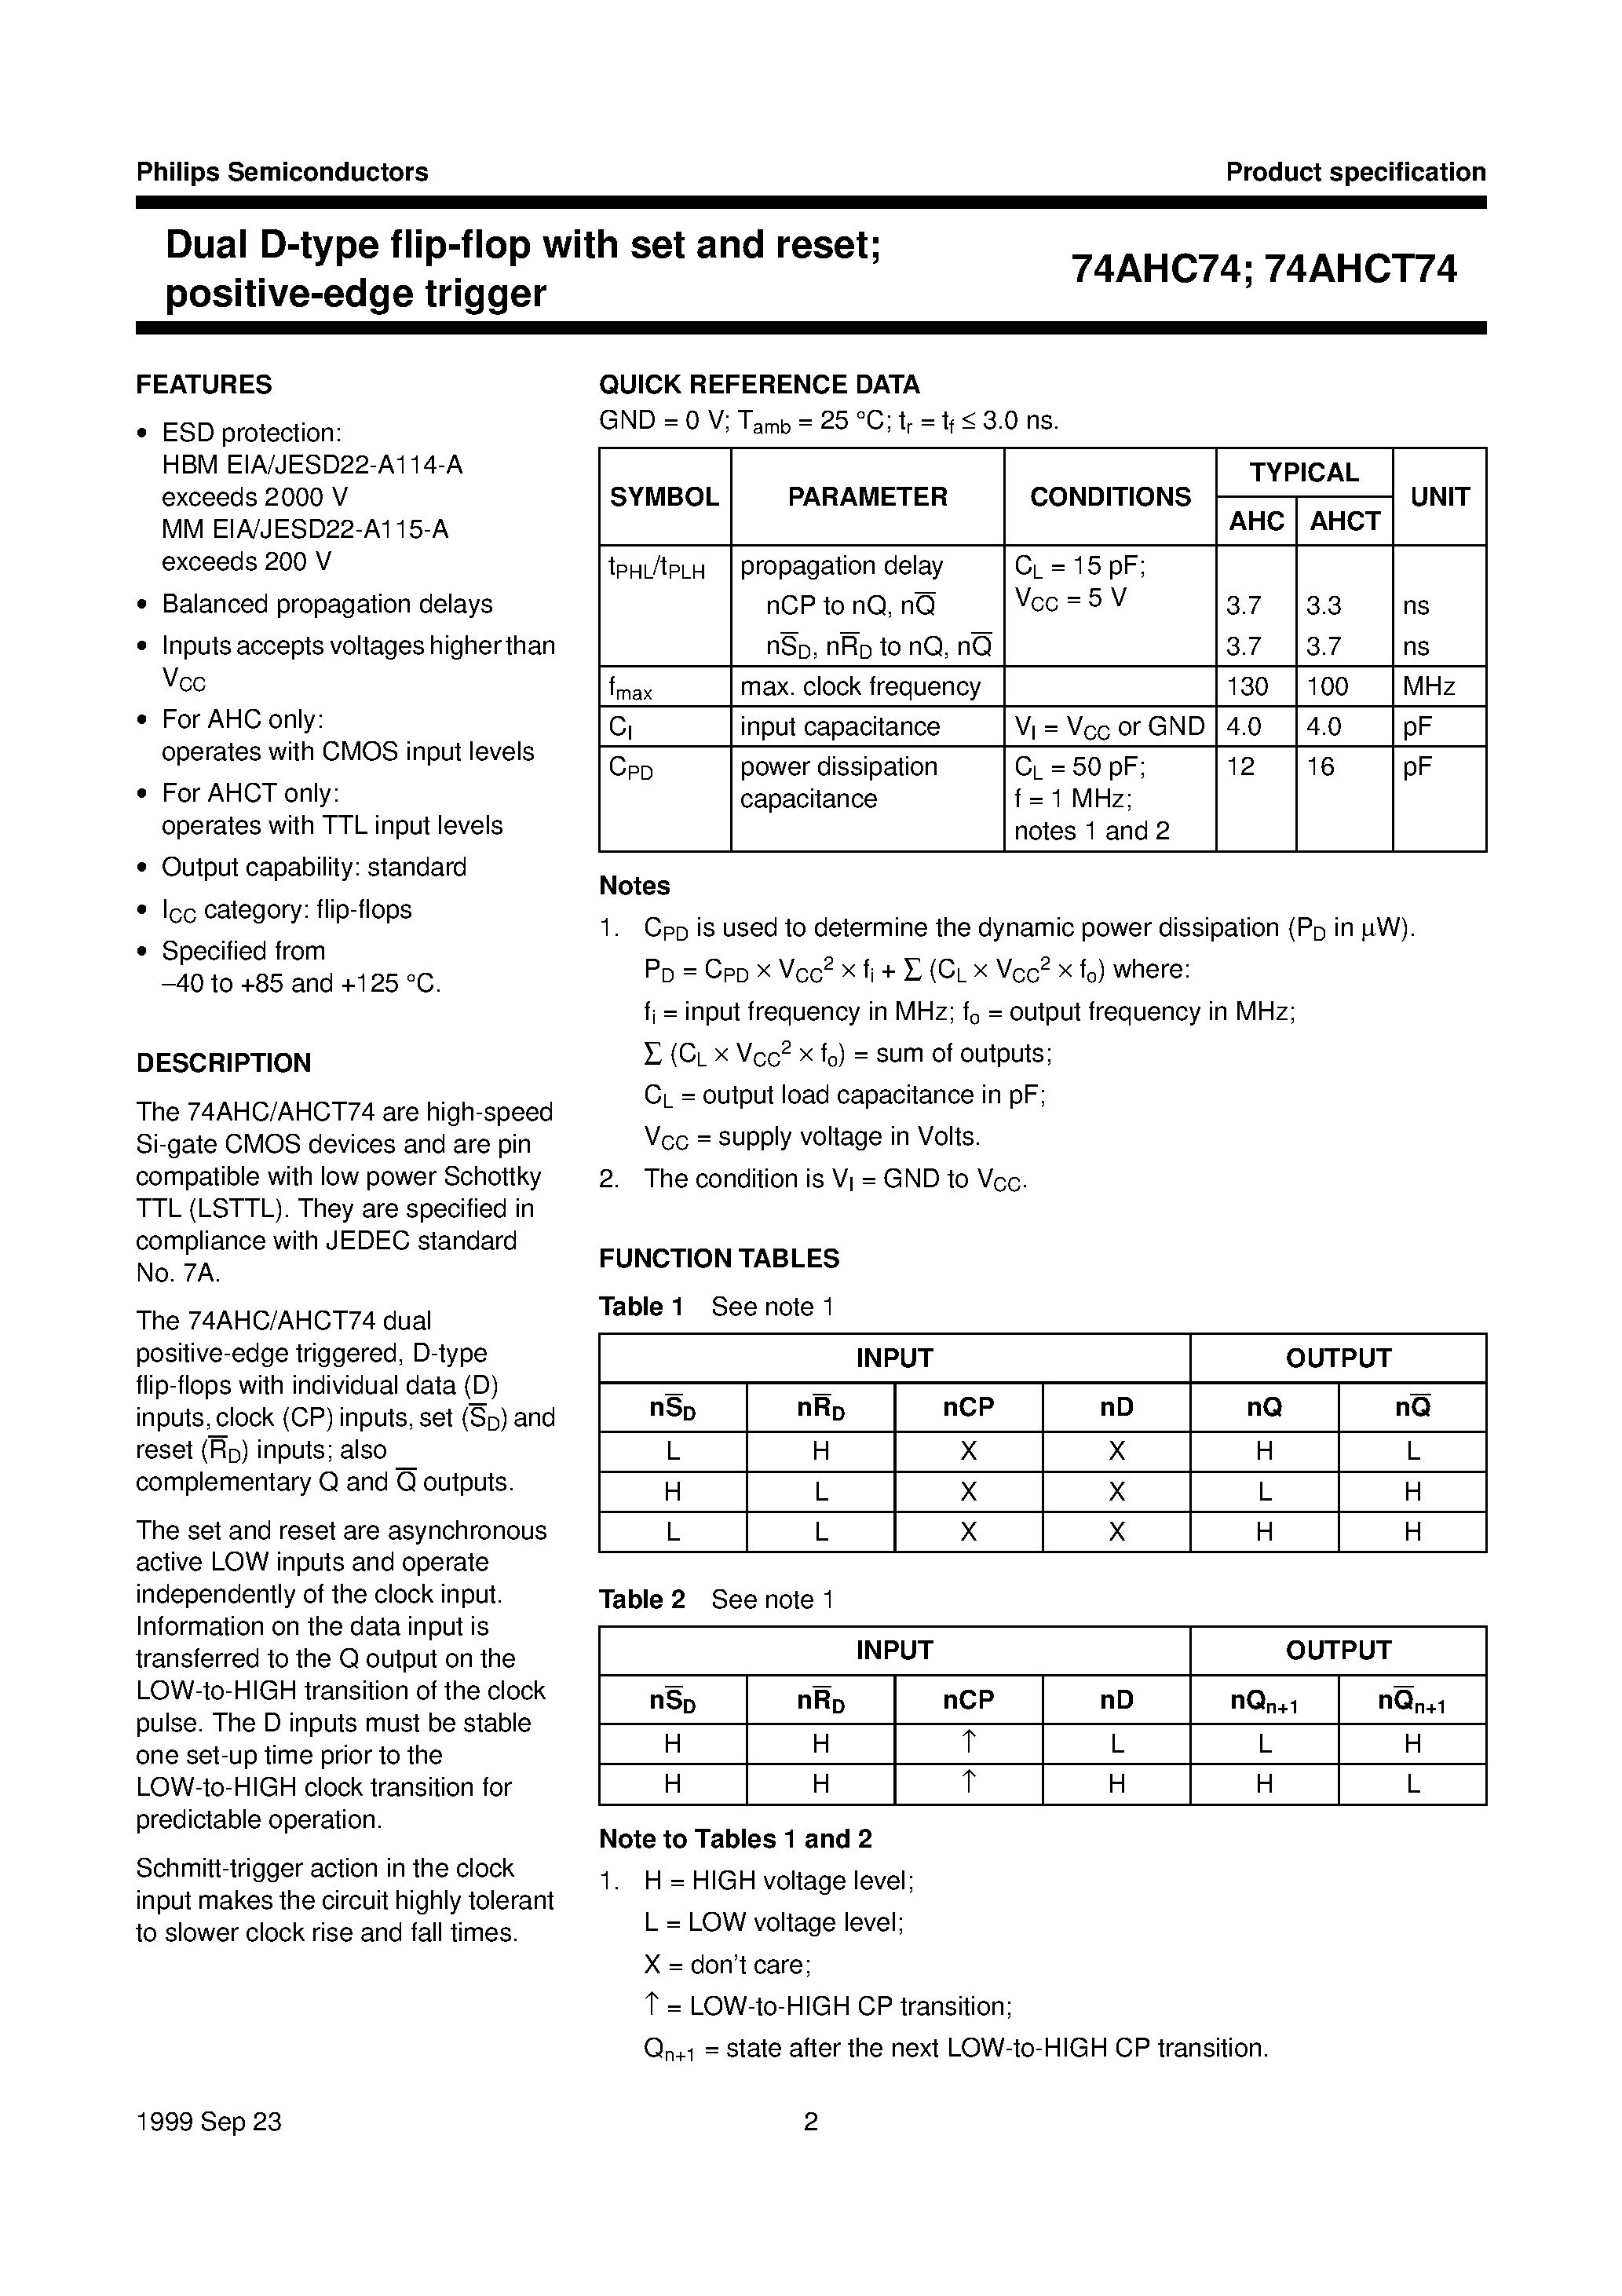 Datasheet 74AHCT74PWDH - Dual D-type flip-flop with set and reset; positive-edge trigger page 2